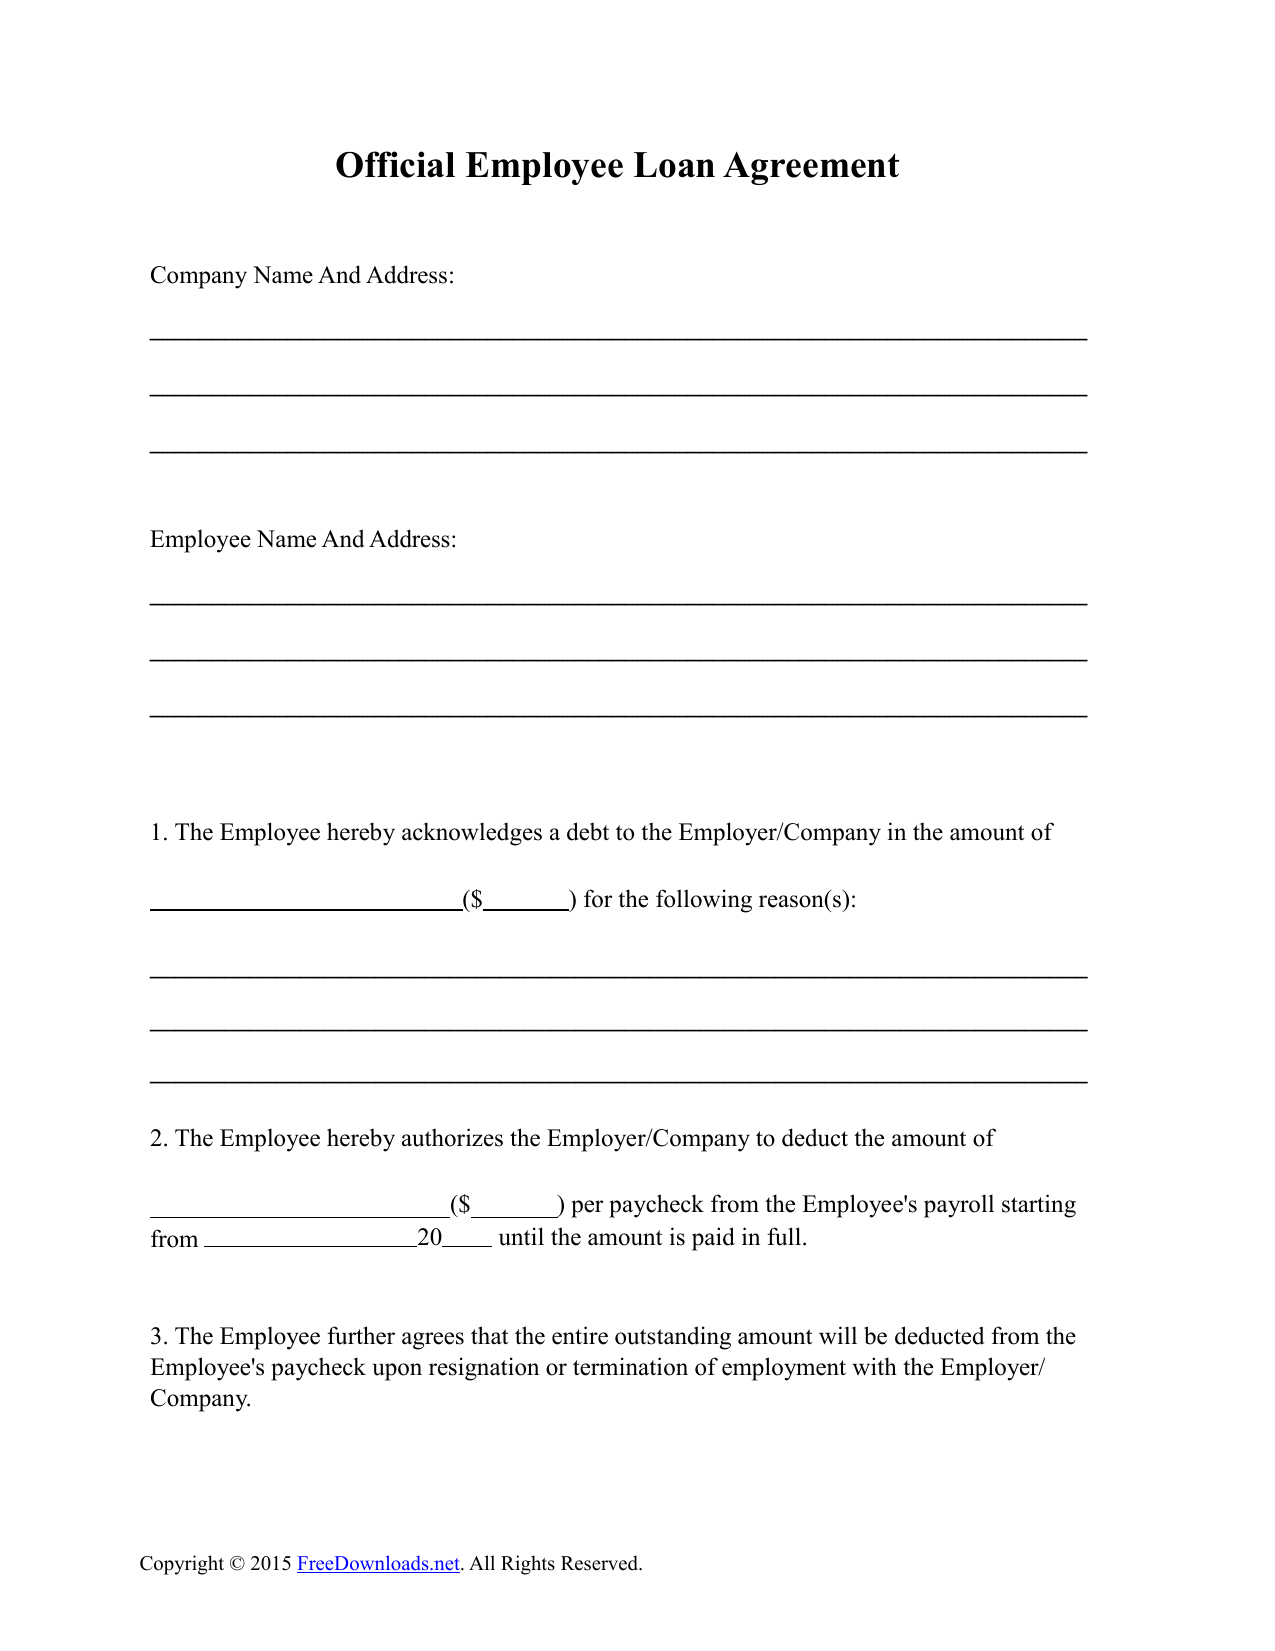 Agreement With Employee Download Employee Loan Agreement Template Pdf Rtf Word